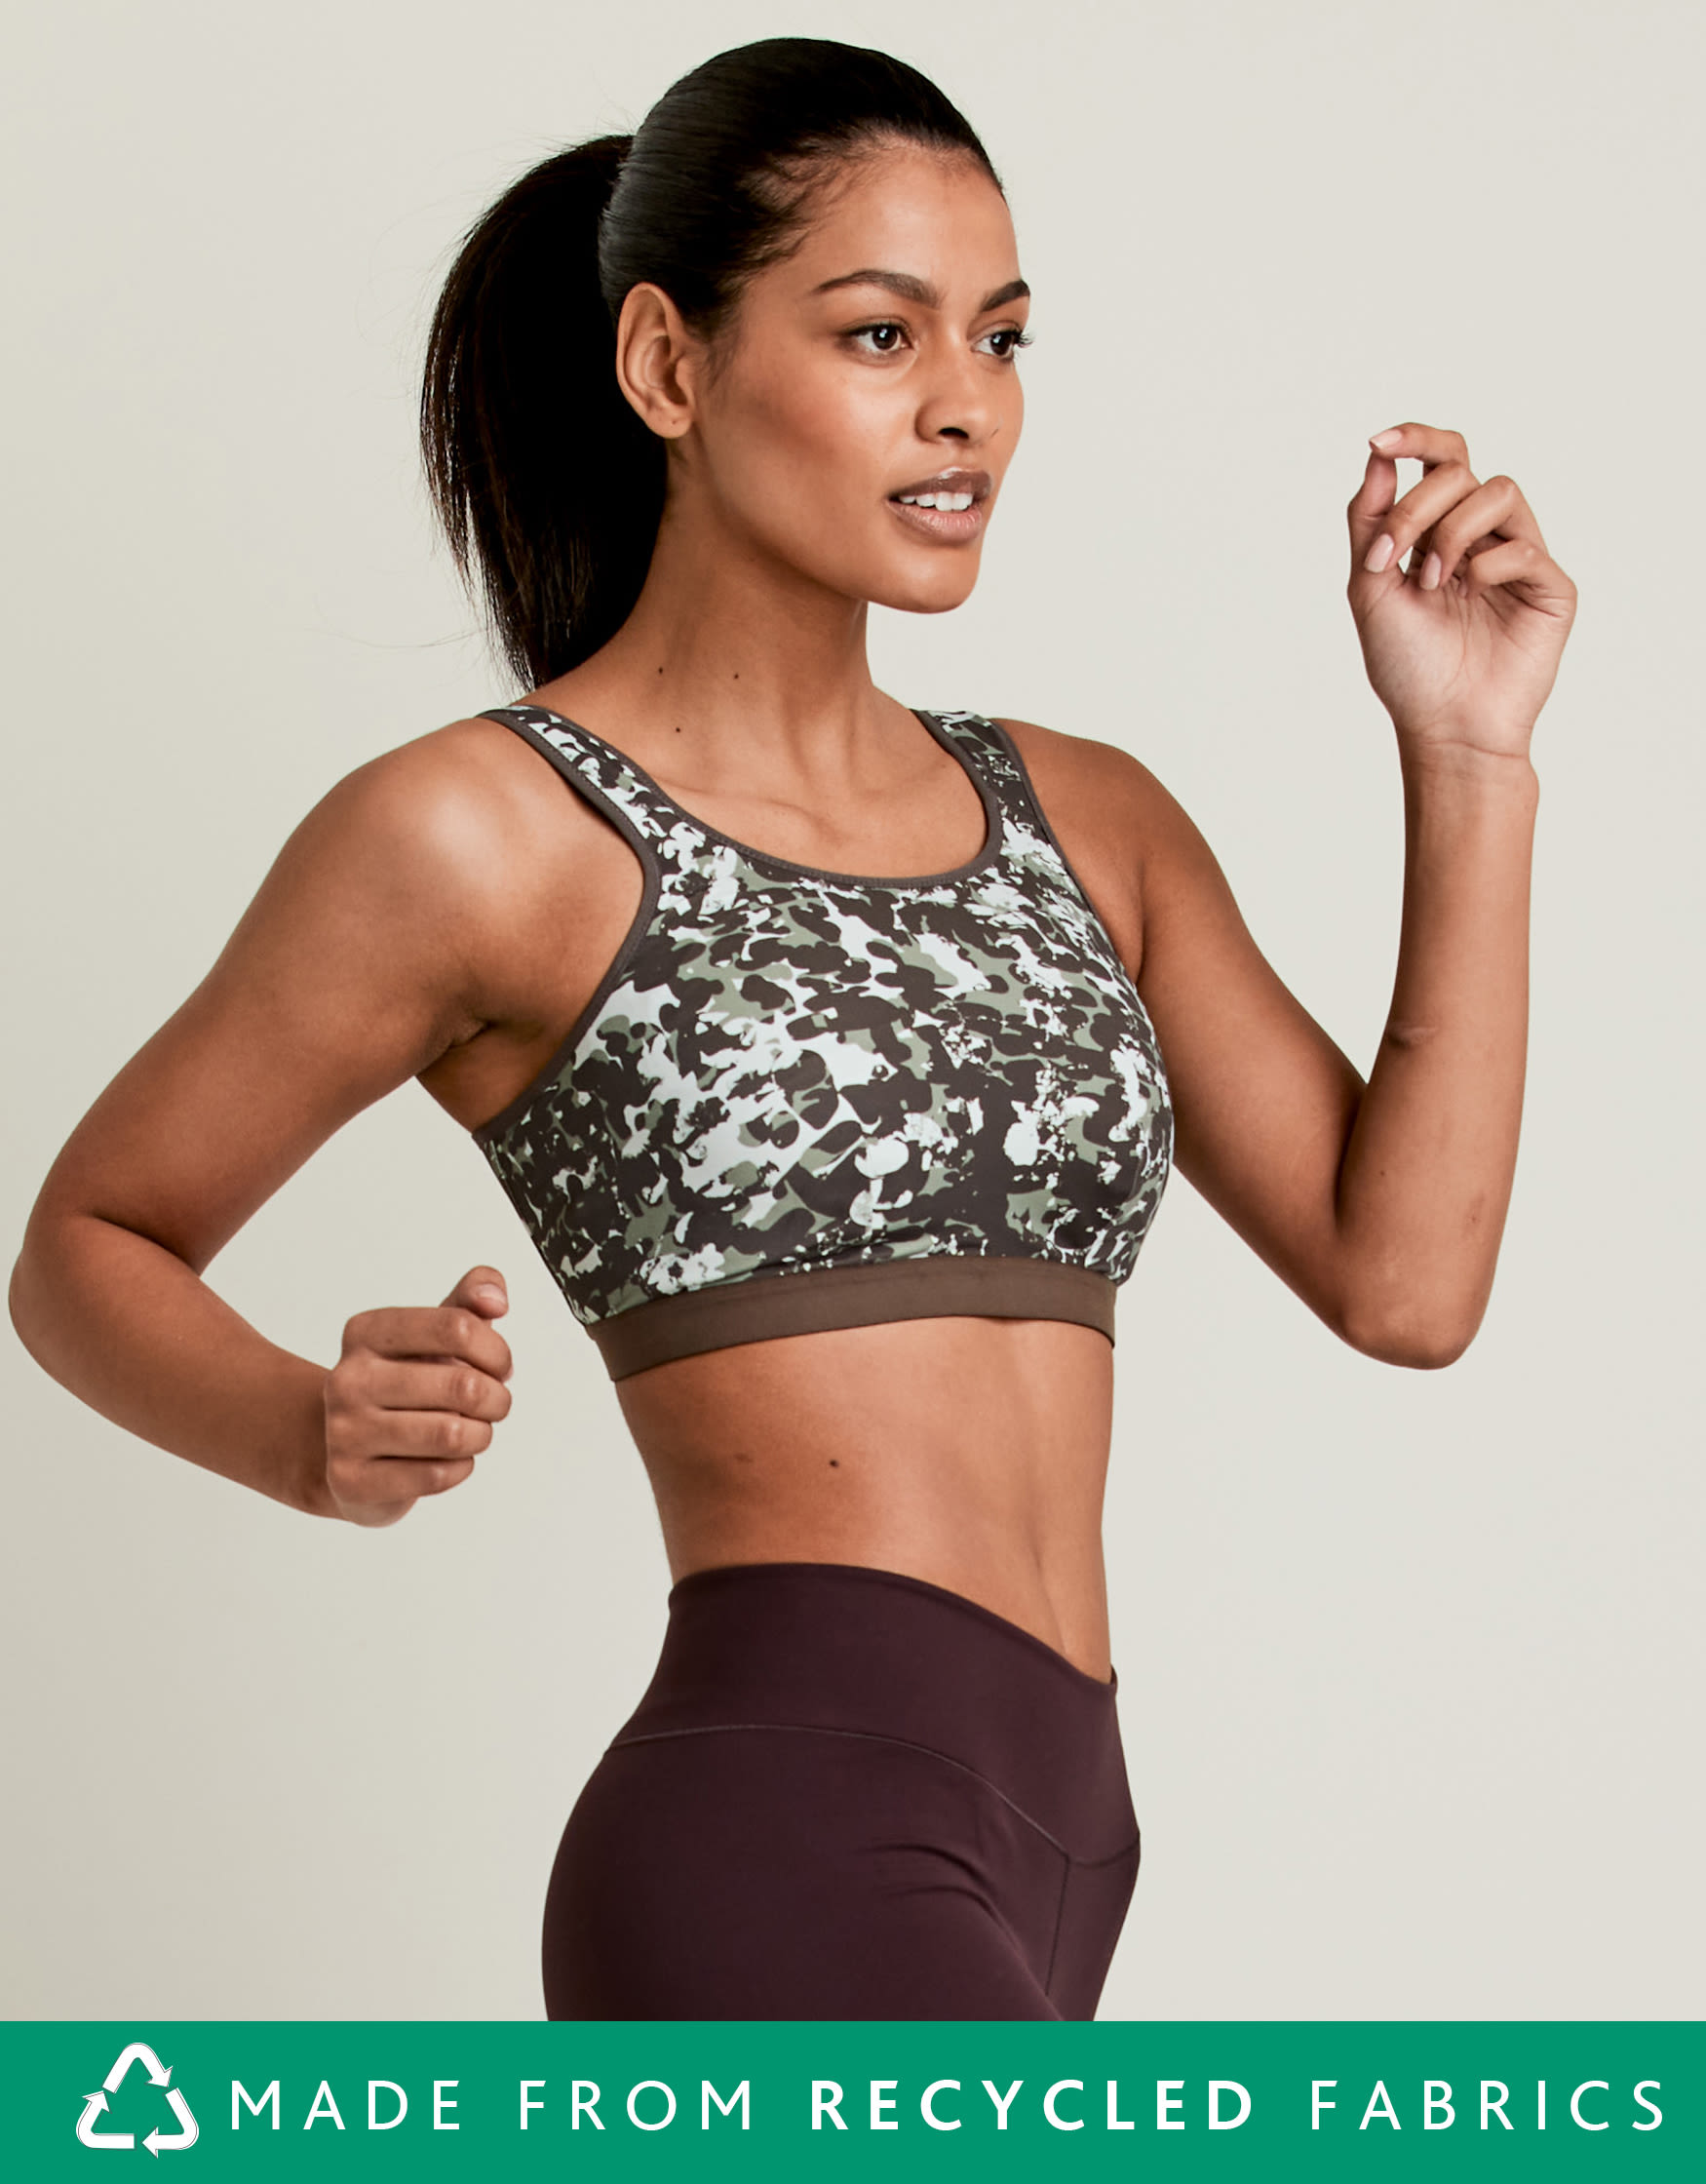 Lineup Low-Impact Sports Bra in Multi & Pink